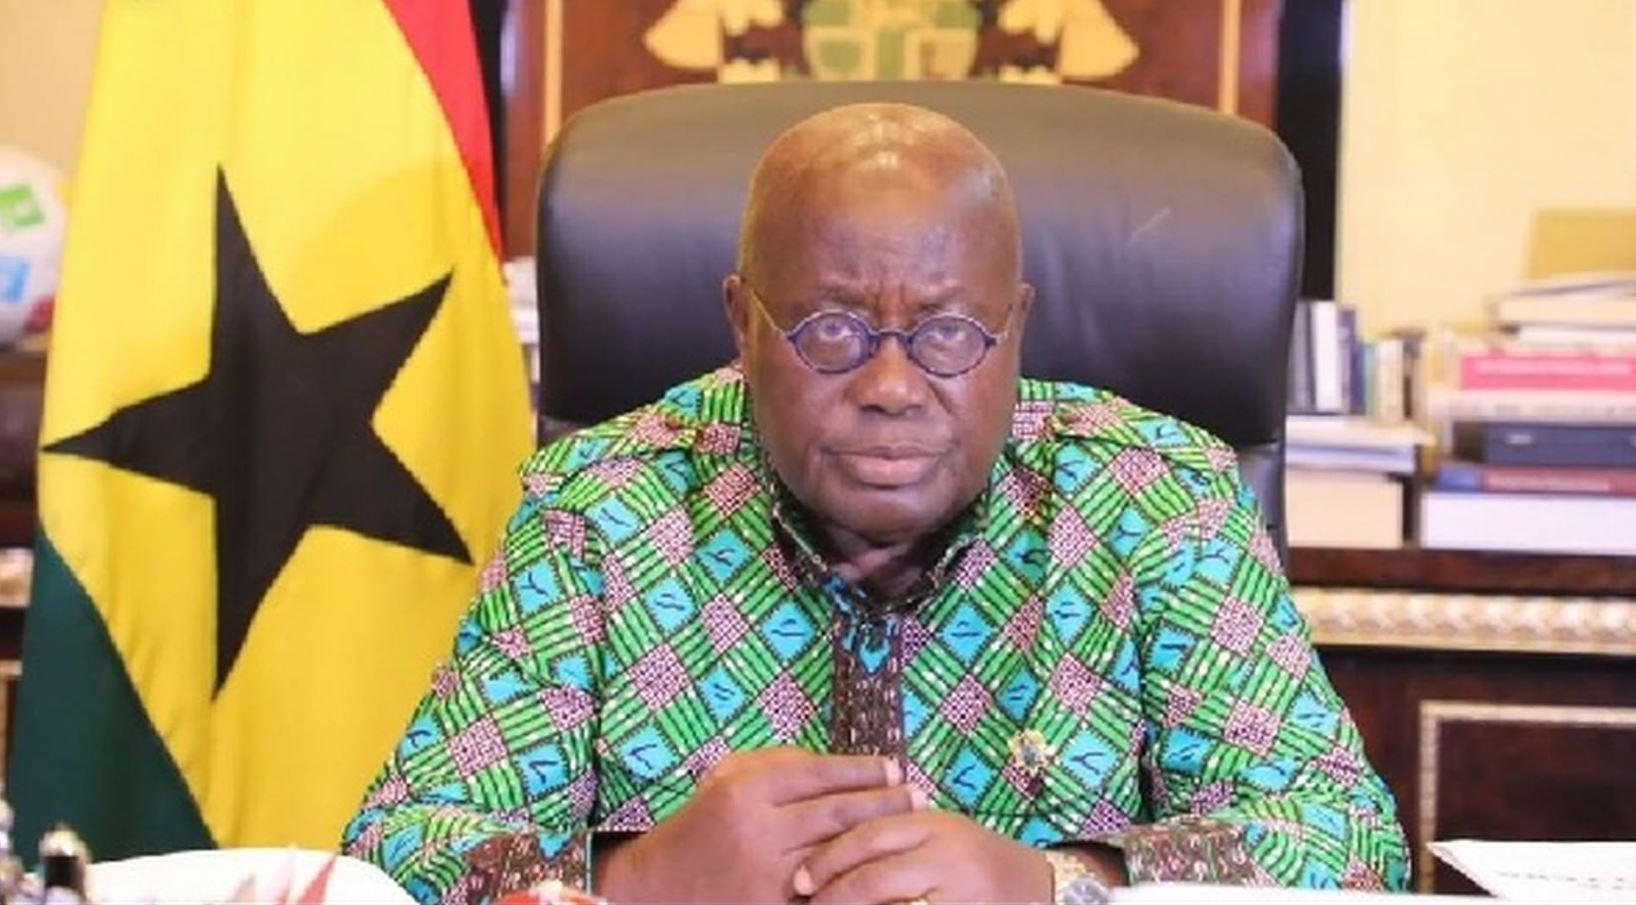 Ghana lifts restriction after a three-week lockdown